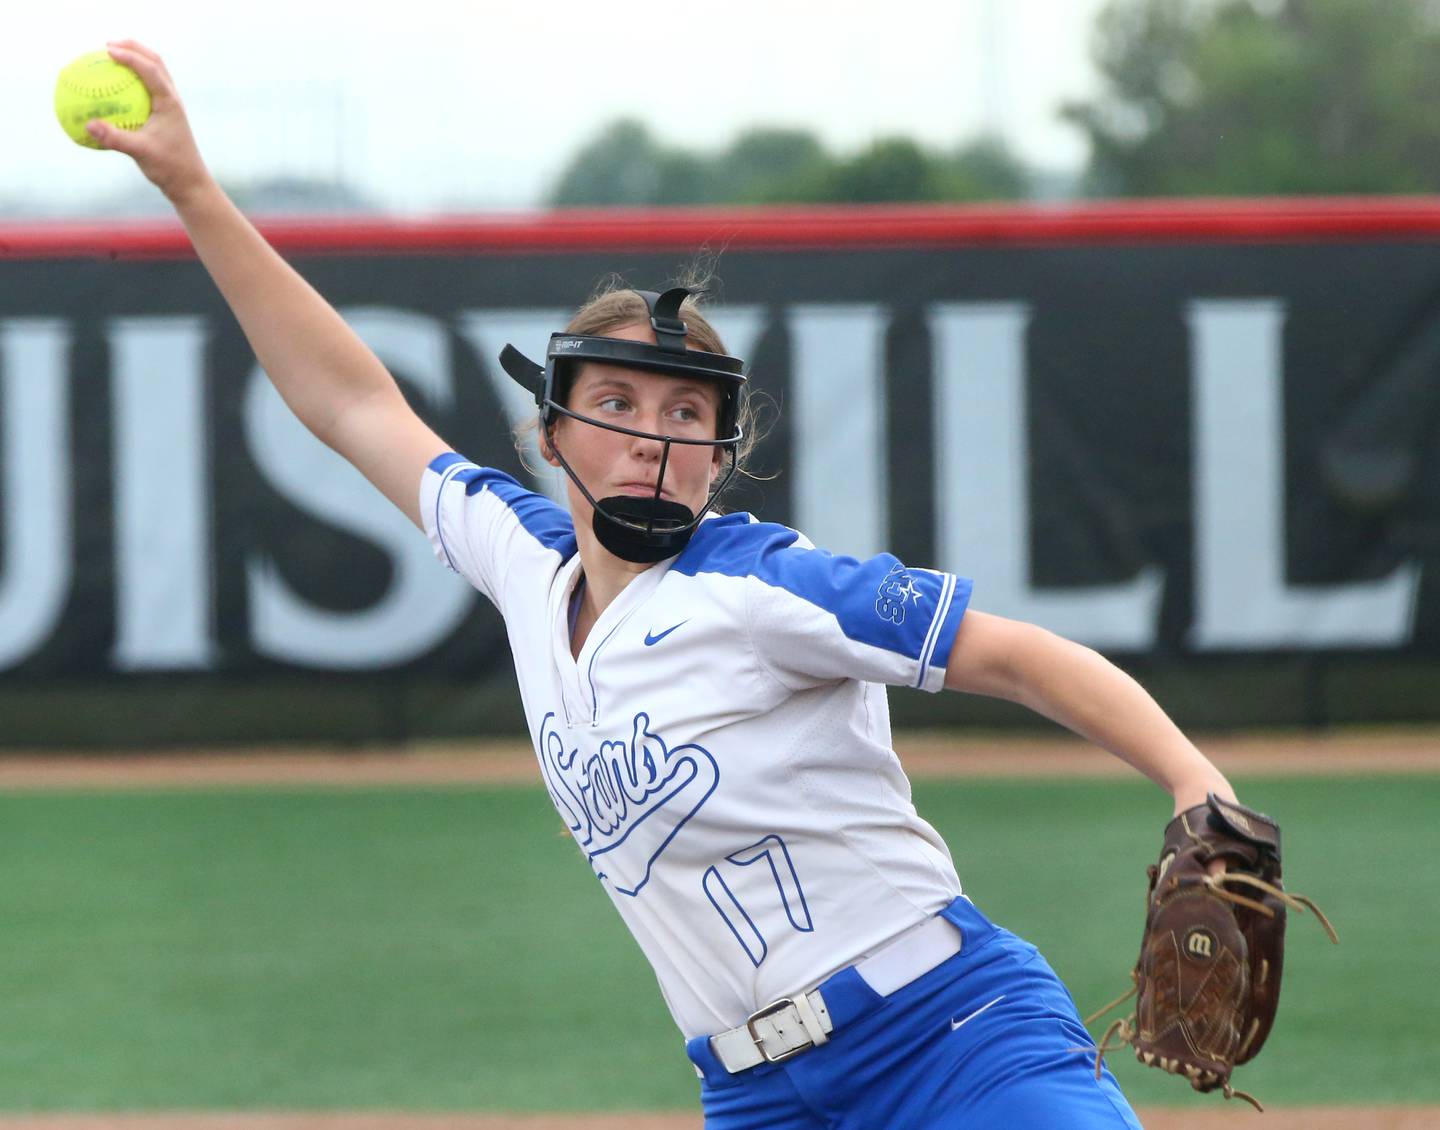 St. Charles North's Ava Goettel delivers a pitch to Chicago Marist in the Class 4A softball state championship on Saturday, June 11, 2022 at the Louisville Slugger Complex in Peoria.